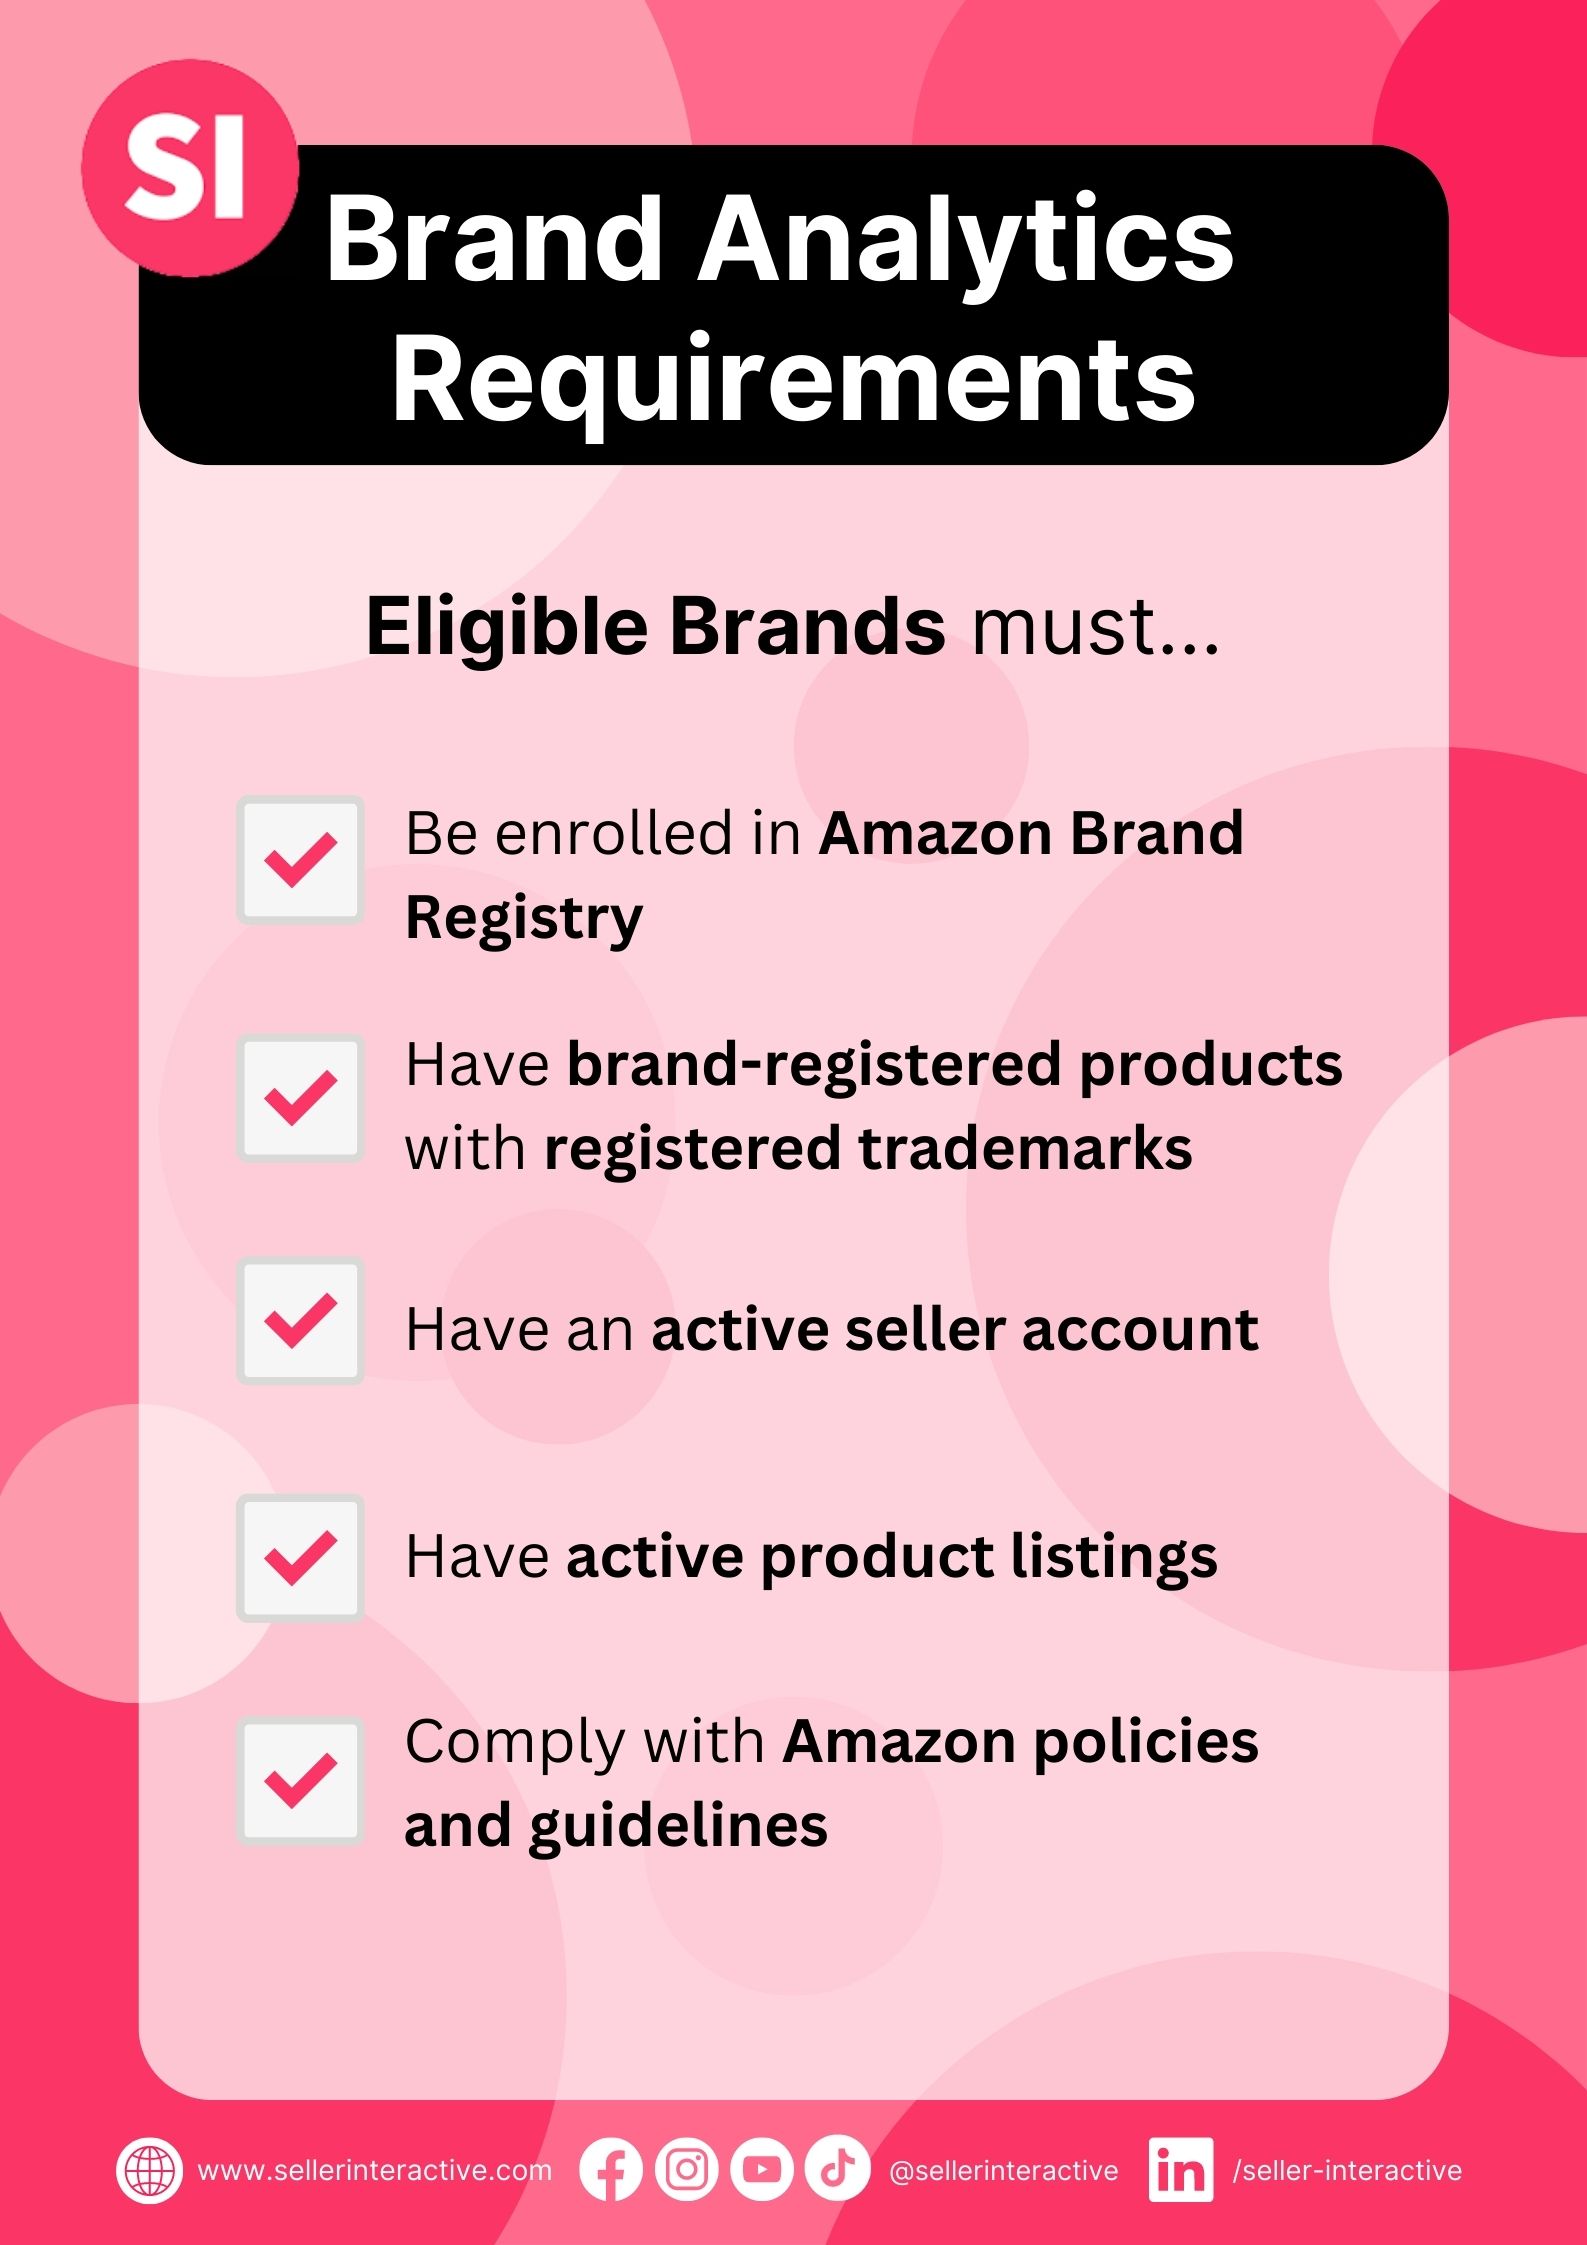 graphic showing a checklist of brand requirements to use Amazon Brand Analytics